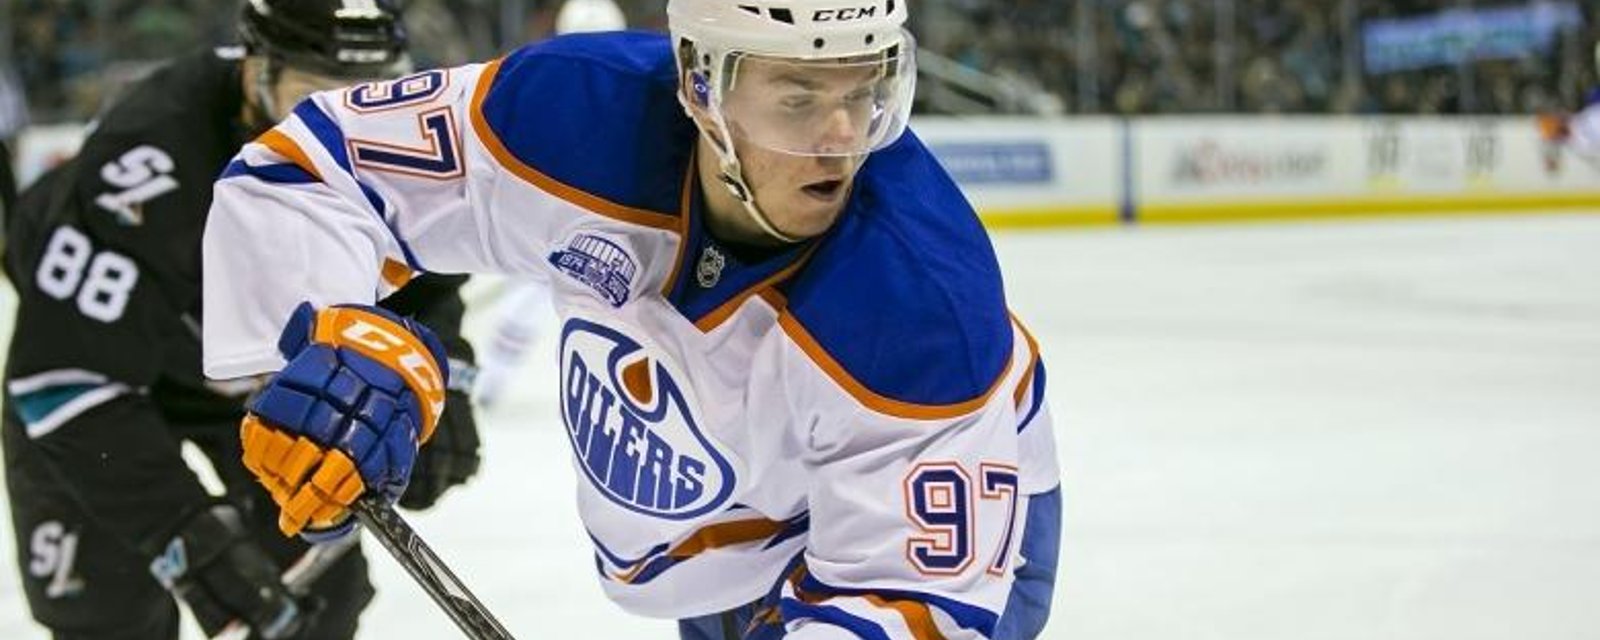 Connor McDavid drops hints of a potentially bigger role during exclusive interview.